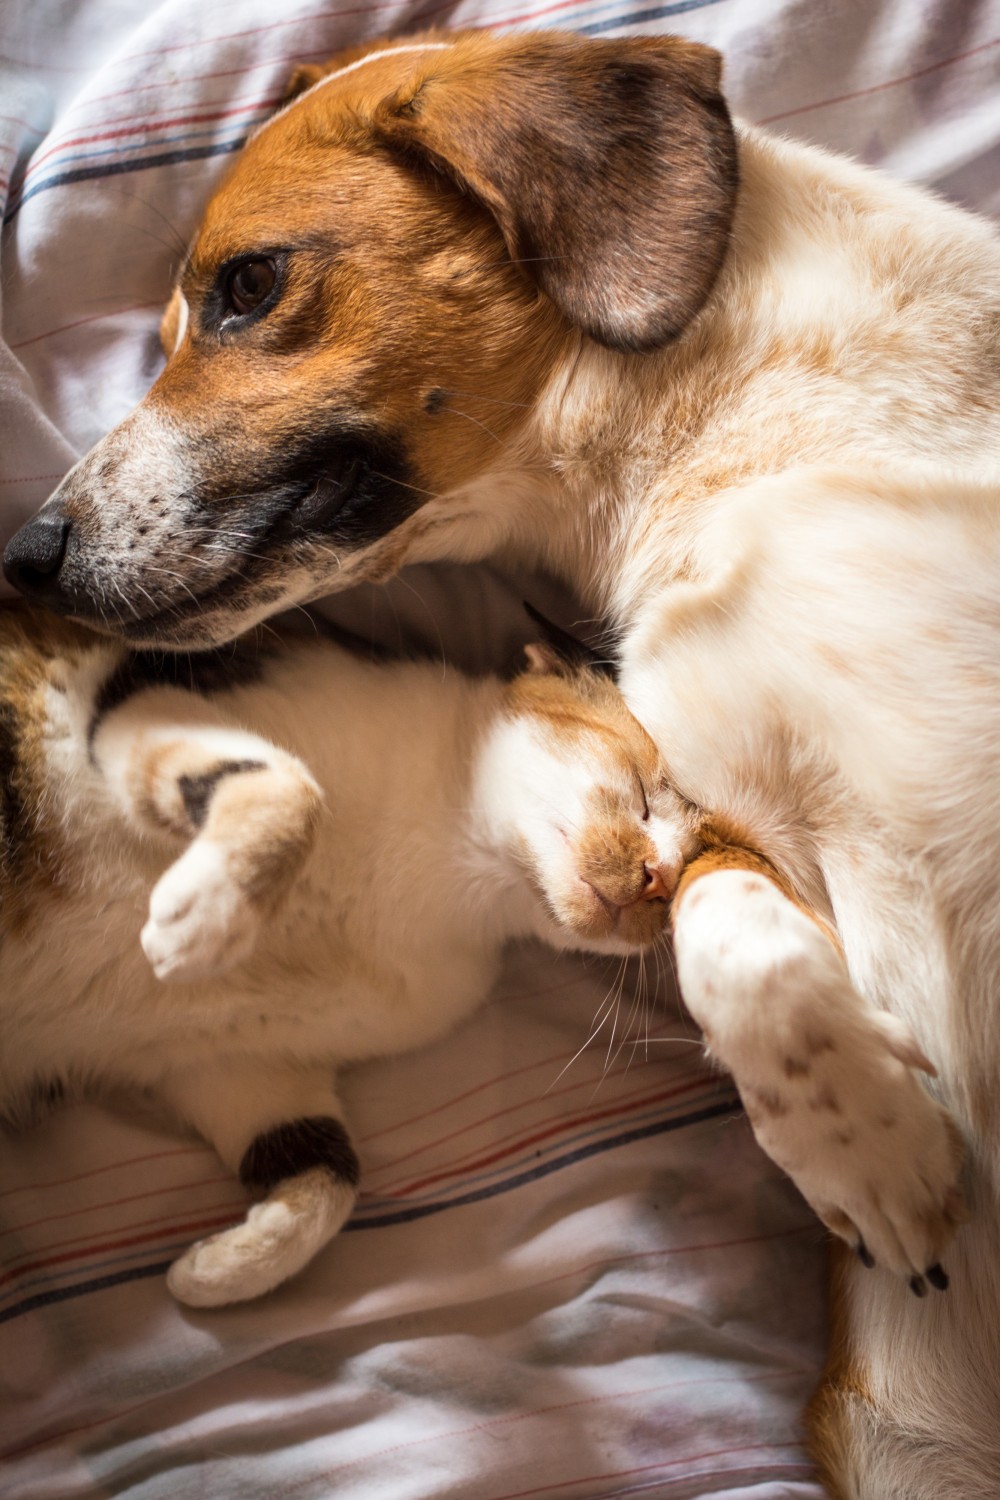 Snuggling Cat and dog